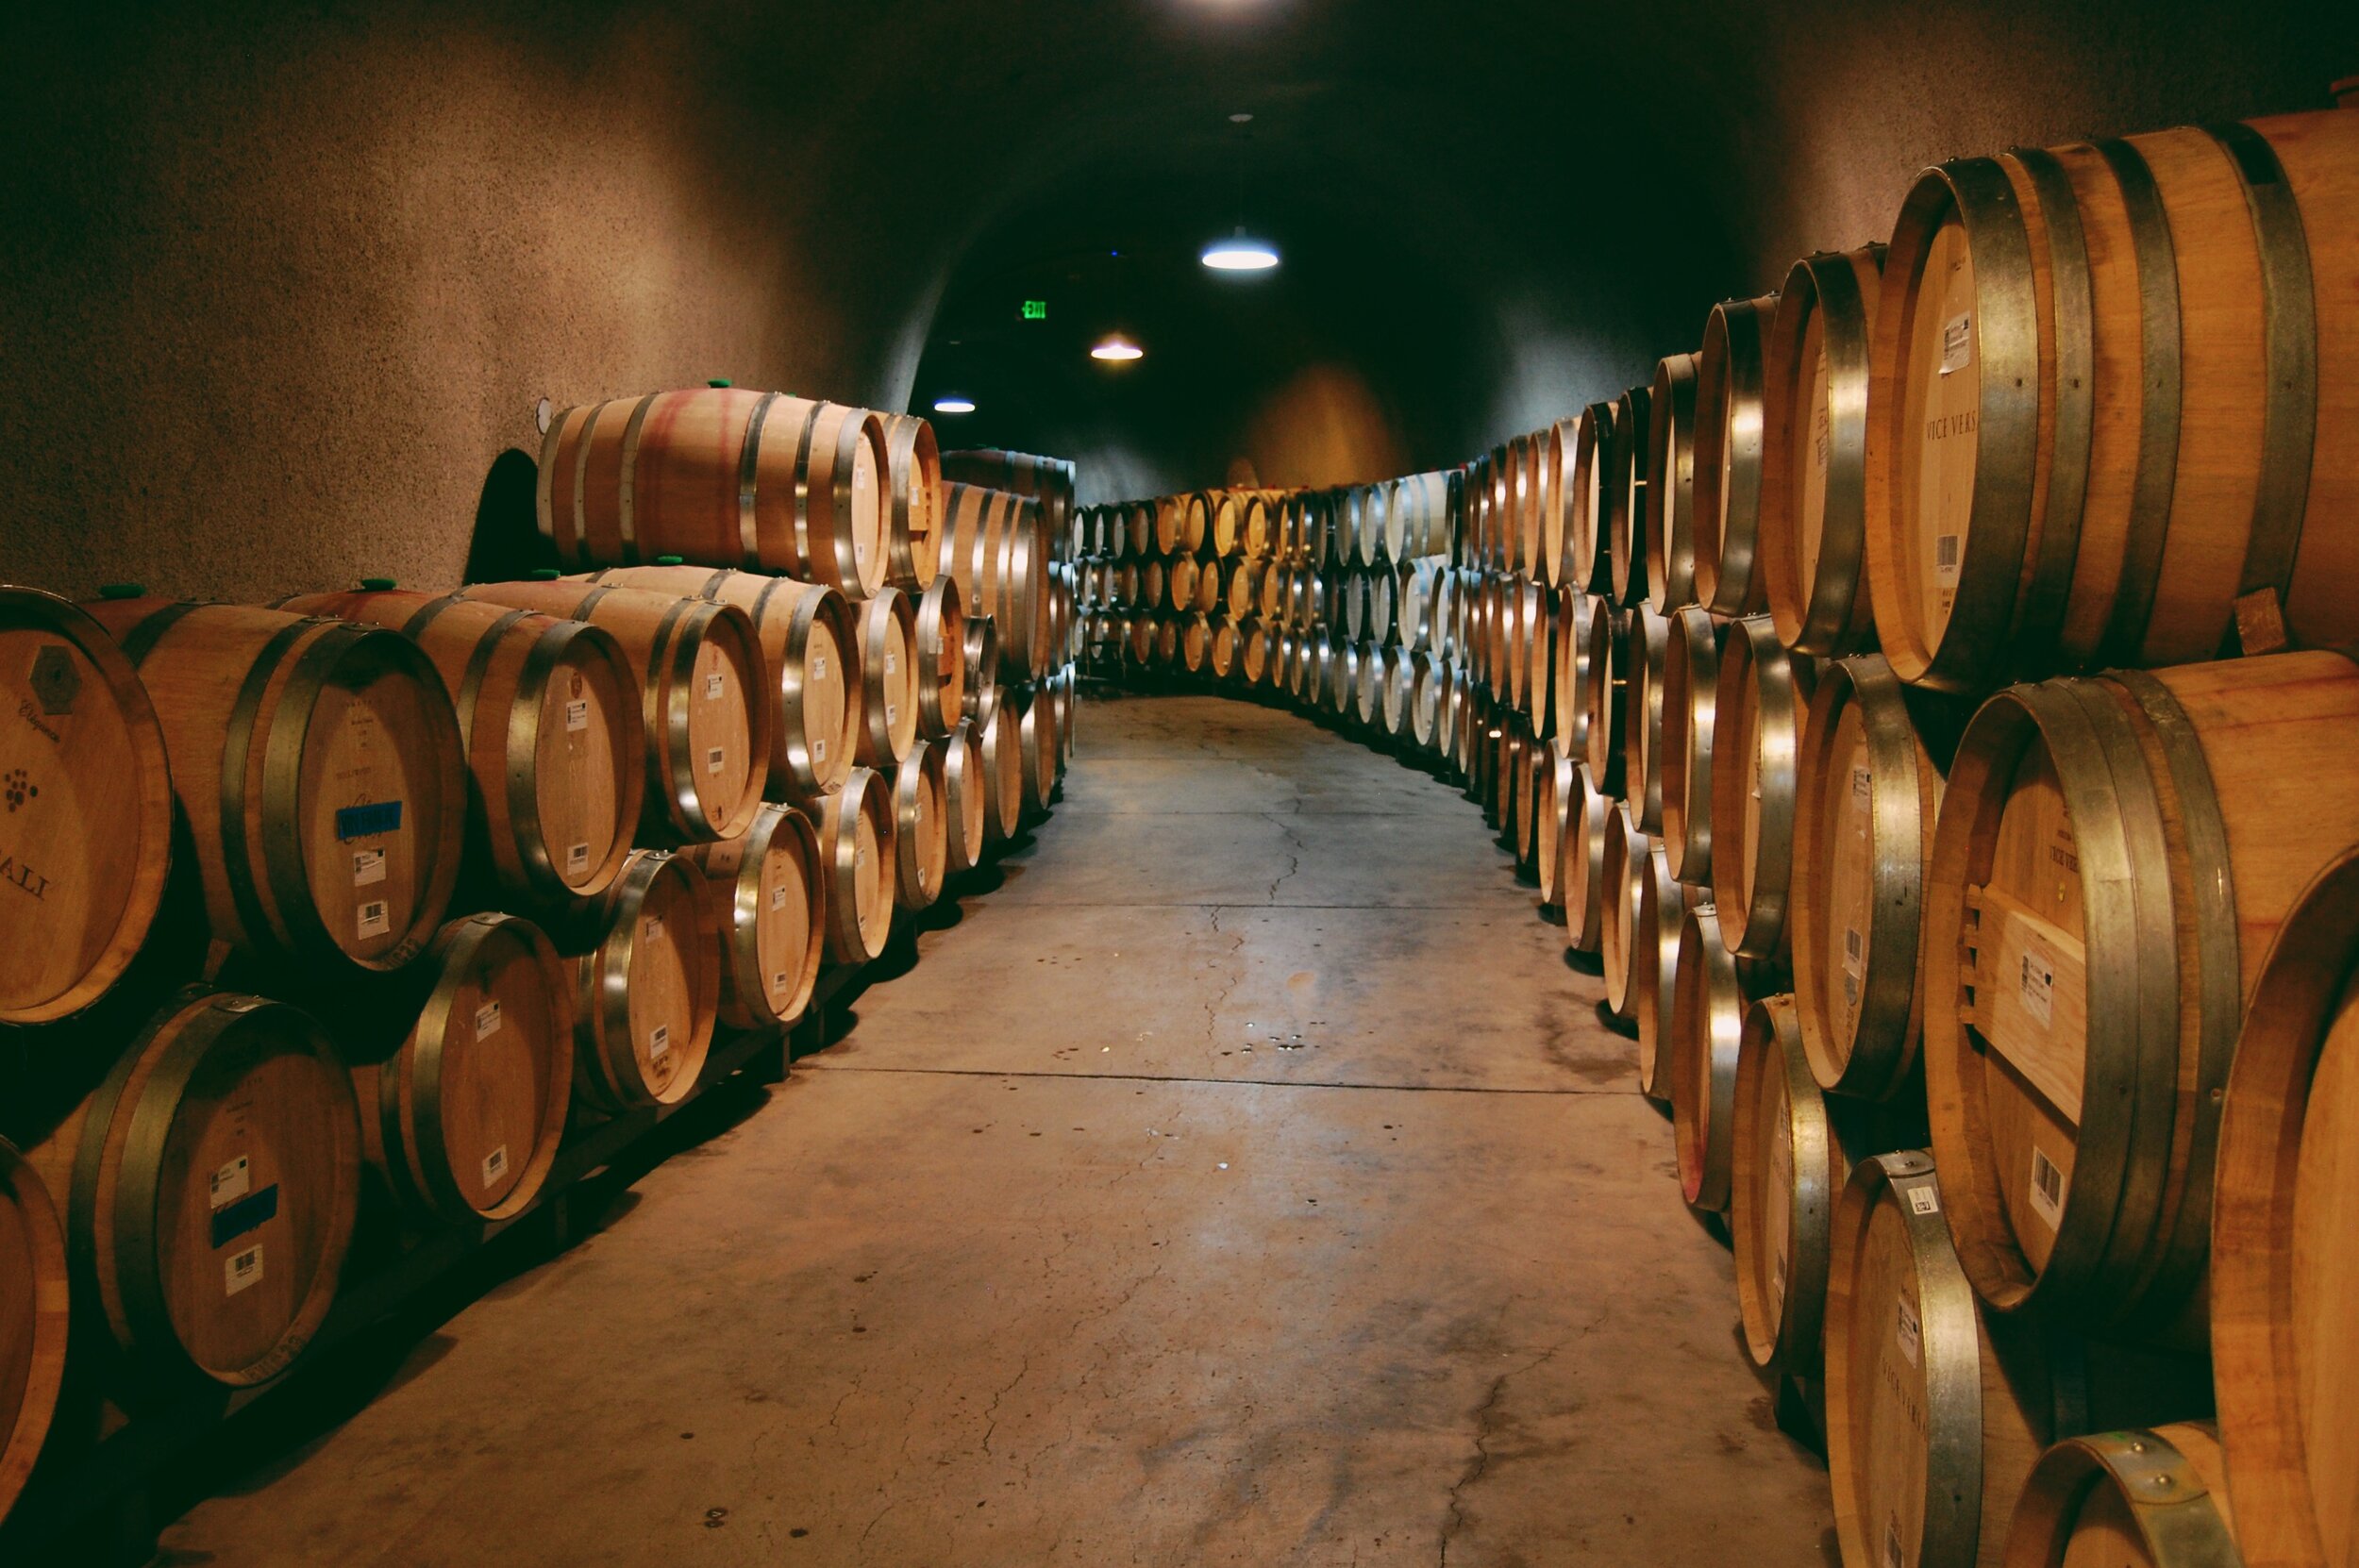 Barrels stacked and lined up in the cellar